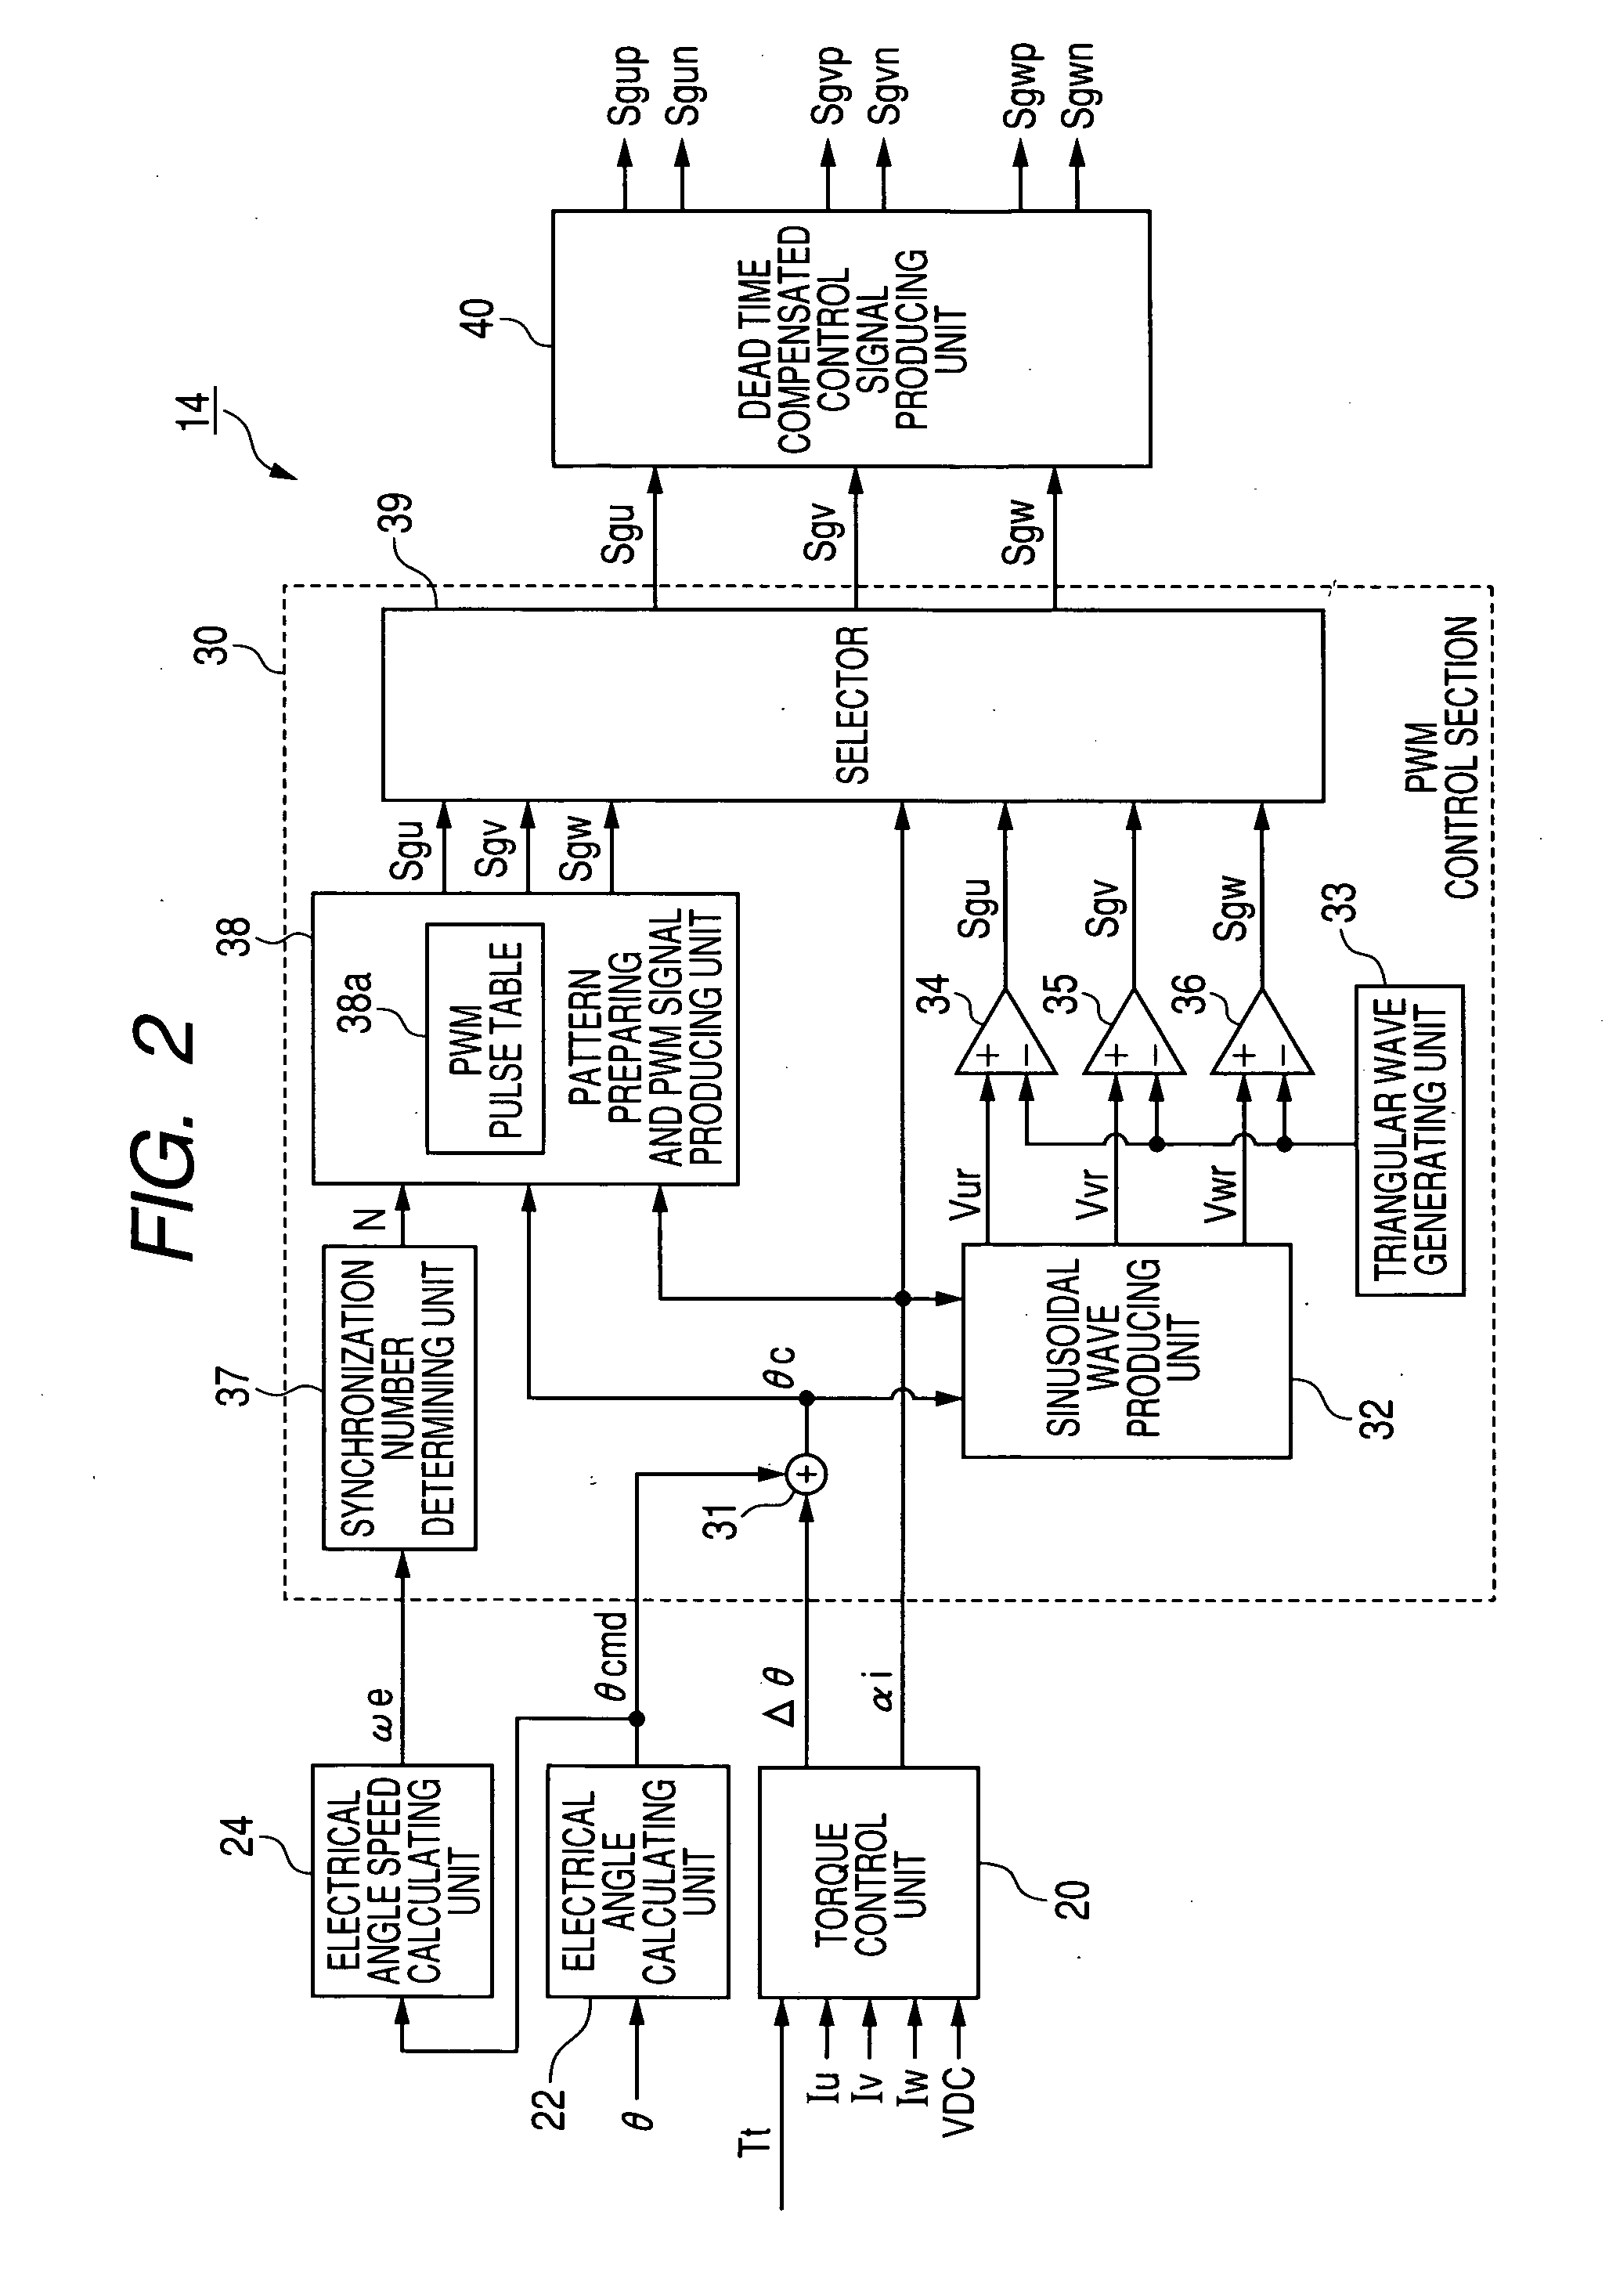 Control device for electric rotating machine and method of controlling the machine